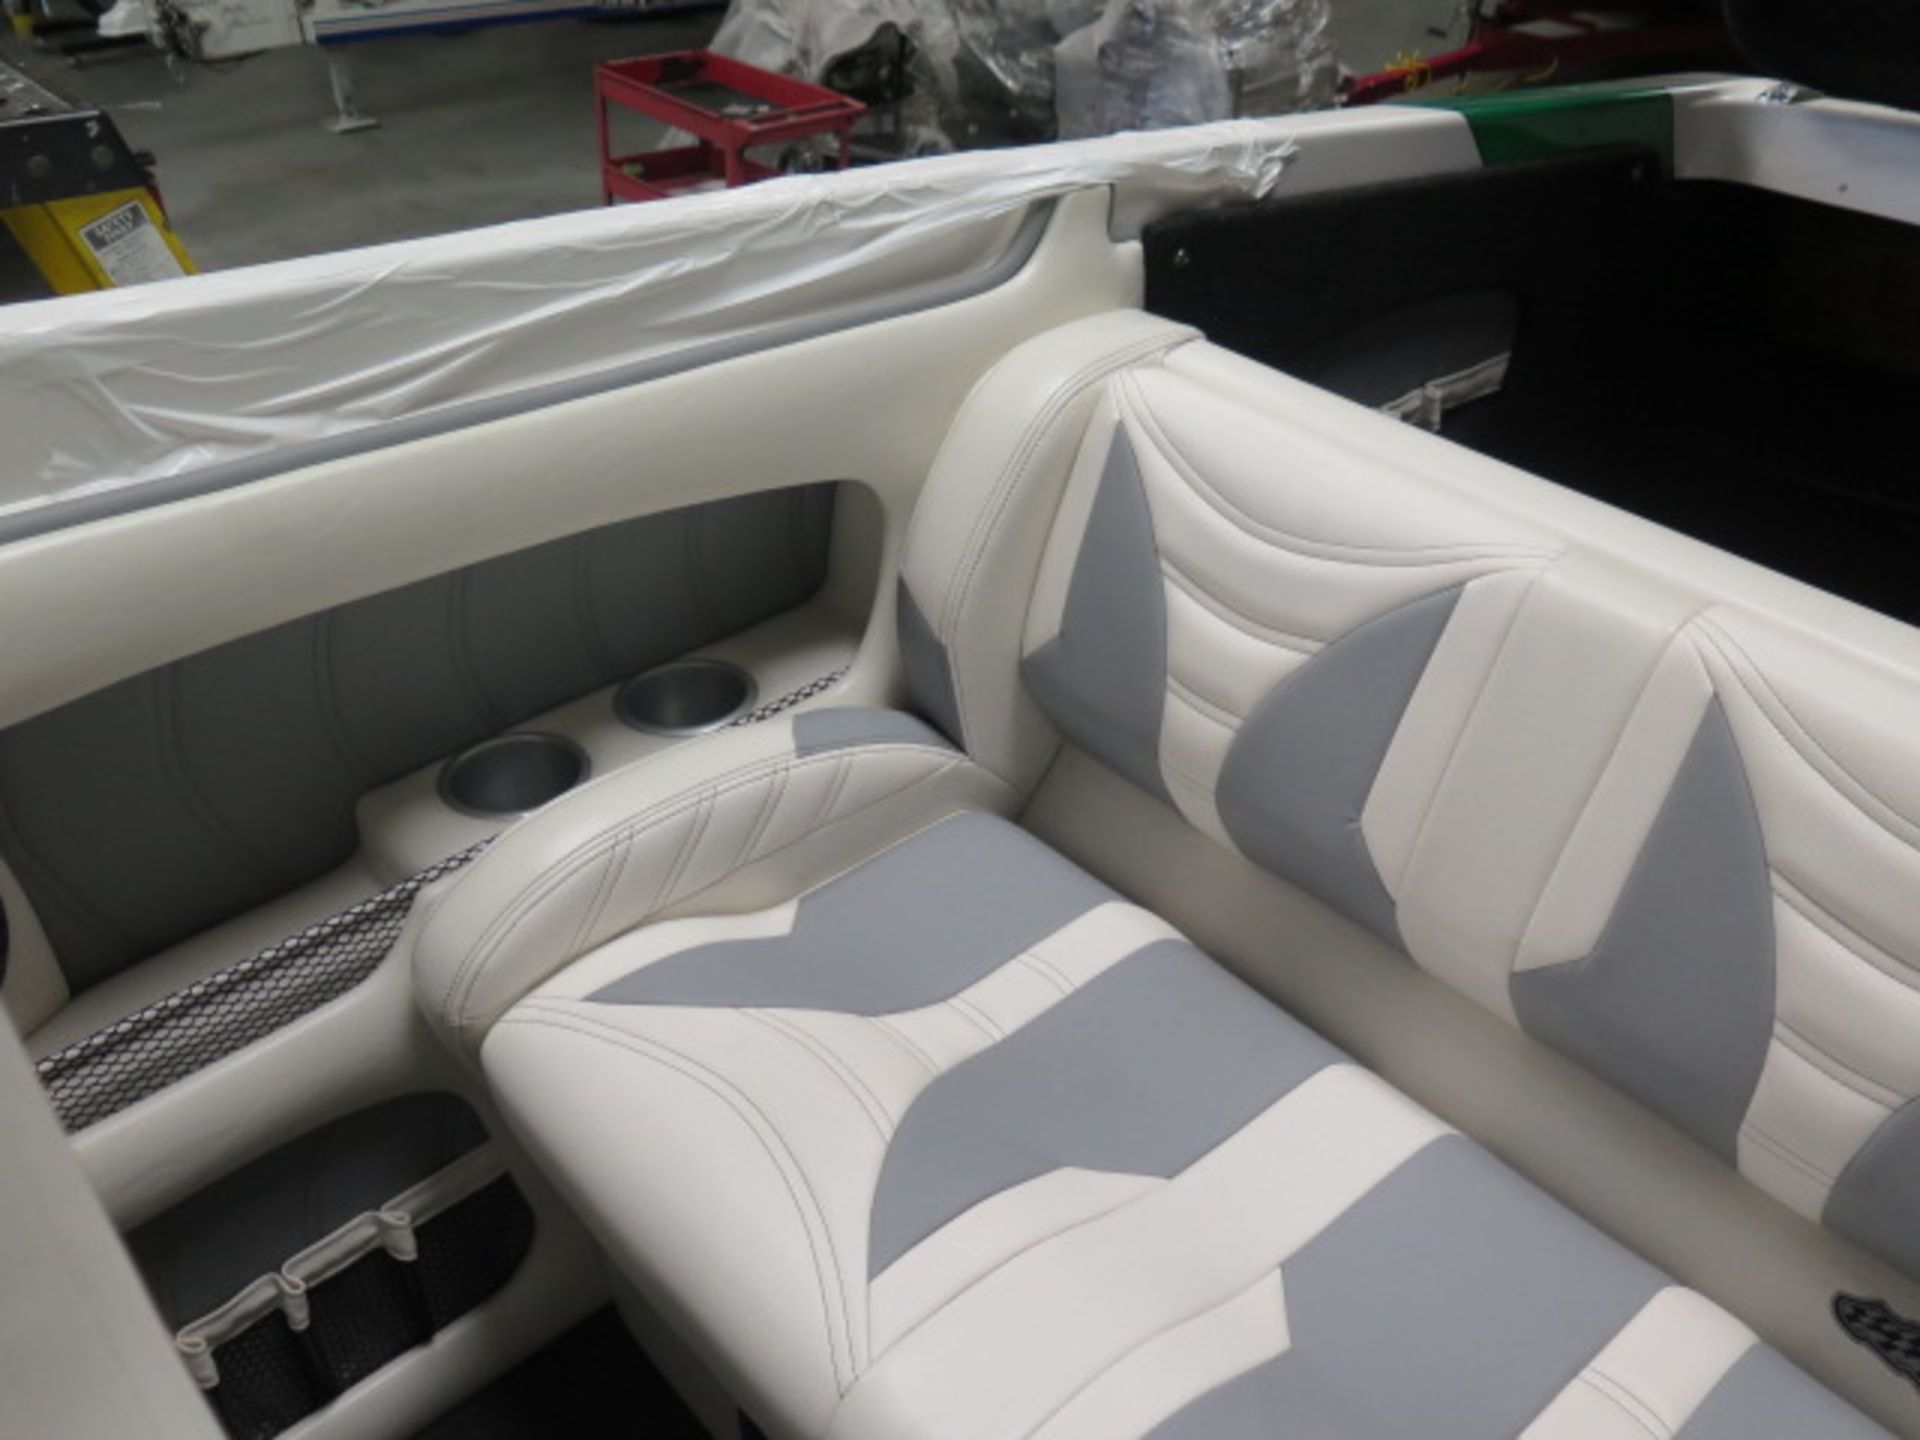 2020 Laveycraft 24' V-Bottom Open Bow Boat w/ Custon Martinez Interior, Boostpower 675Hp, SOLD AS IS - Image 28 of 40